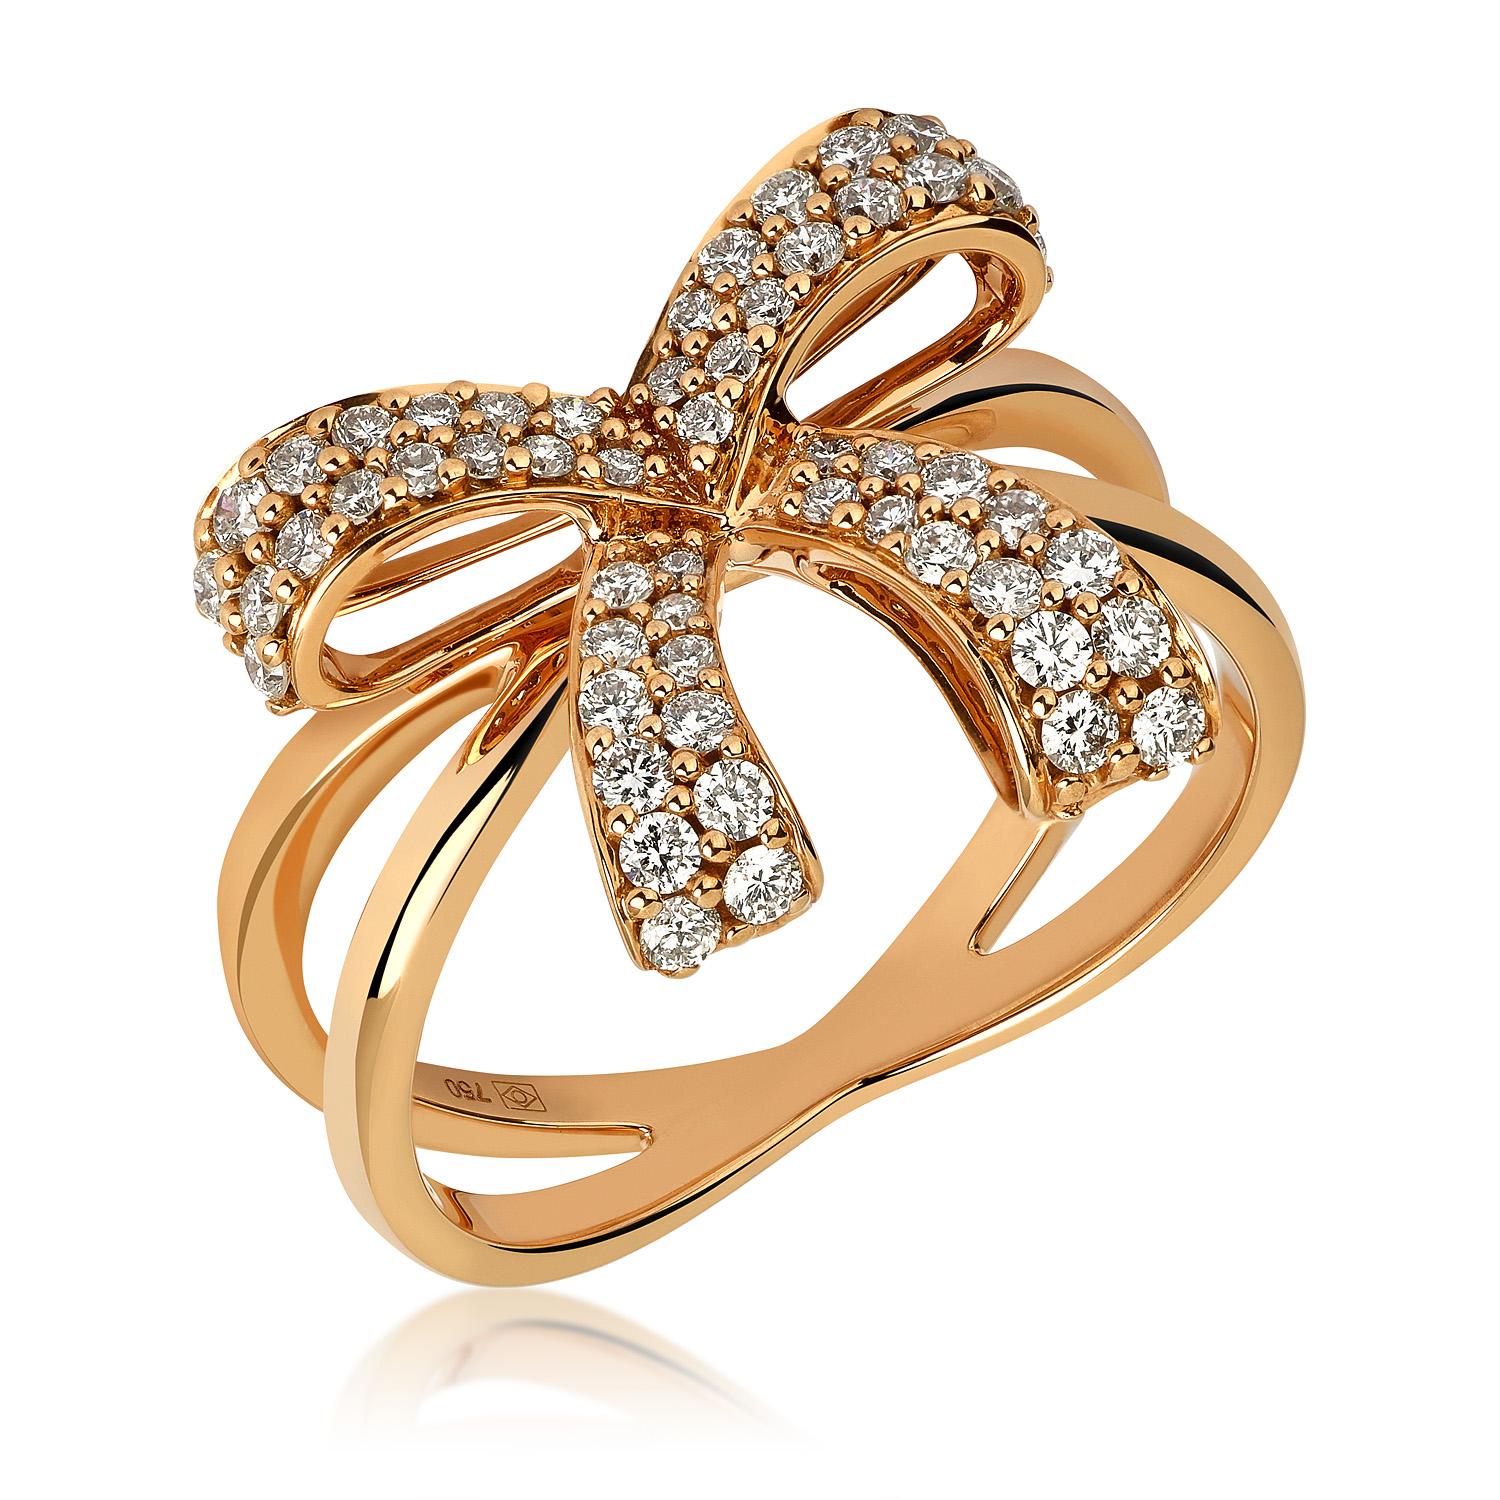 The Romance collection by Hueb is all about being flirtatious and enchanting!  A dainty bow encrusted with diamonds is placed on the top of two intertwining gold bands that is represents infinity. Express yourself in the most effortless manner in